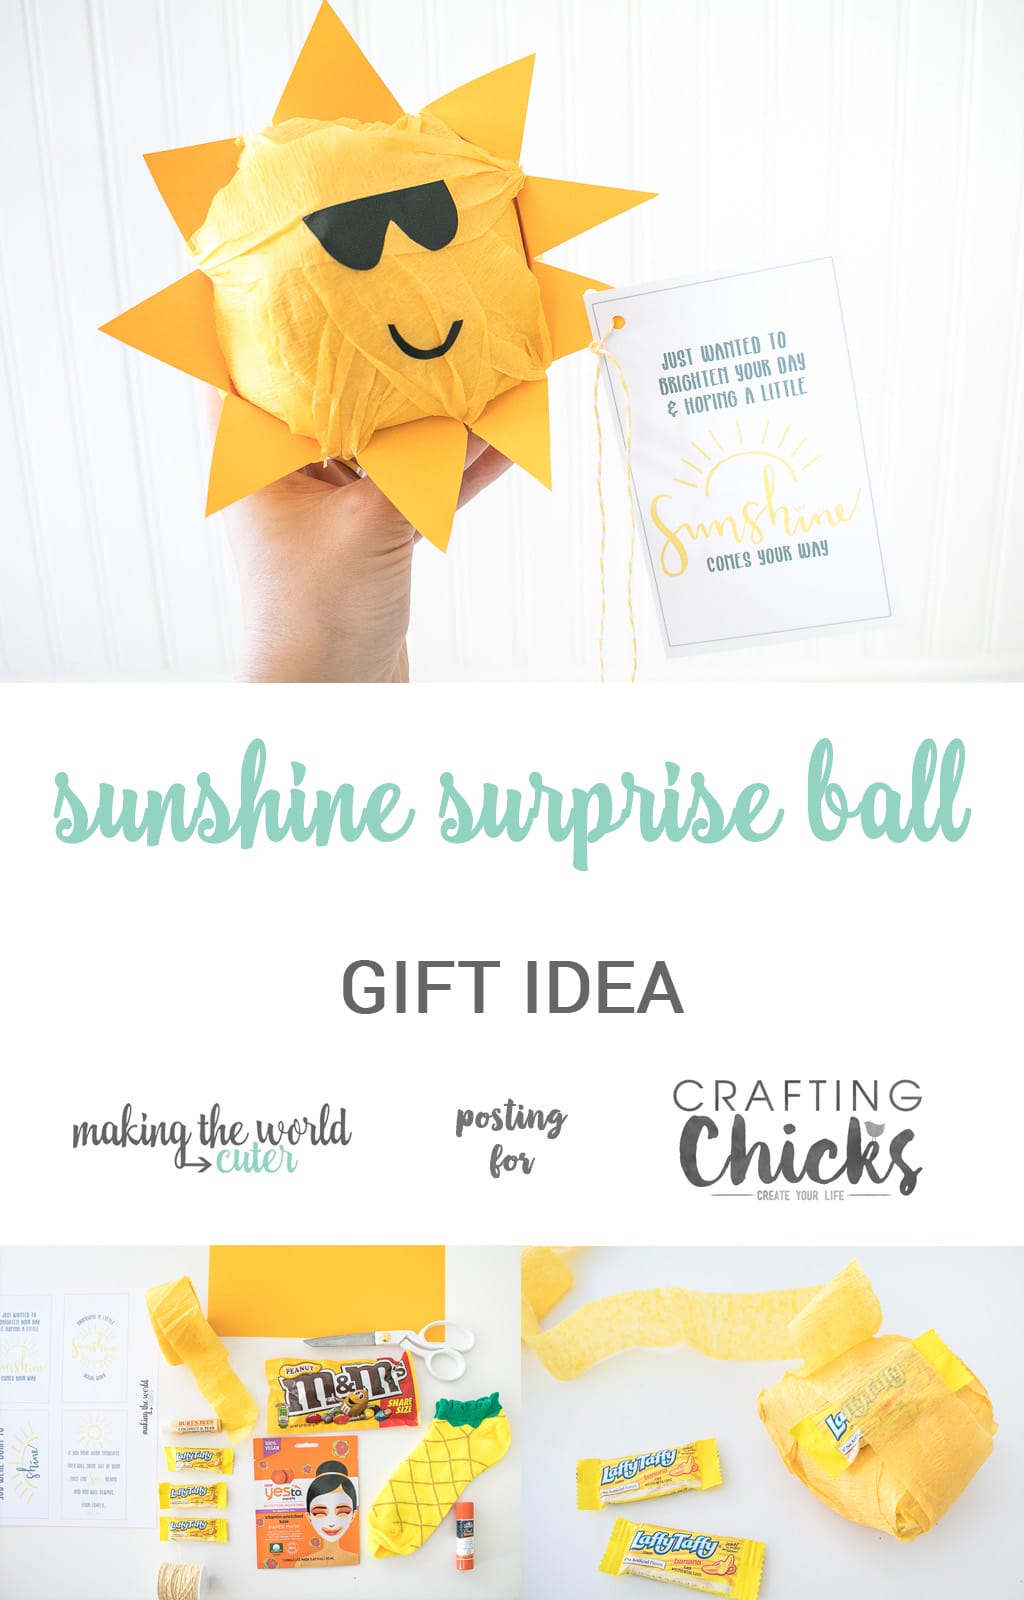 Sunshine Surprise Ball | Looking to make someone's day a little more bright? Make one of these cute sunshine surprise ball gifts for birthdays, get well gifts or just a little random act of kindness! #kindness #kids #activity #craft